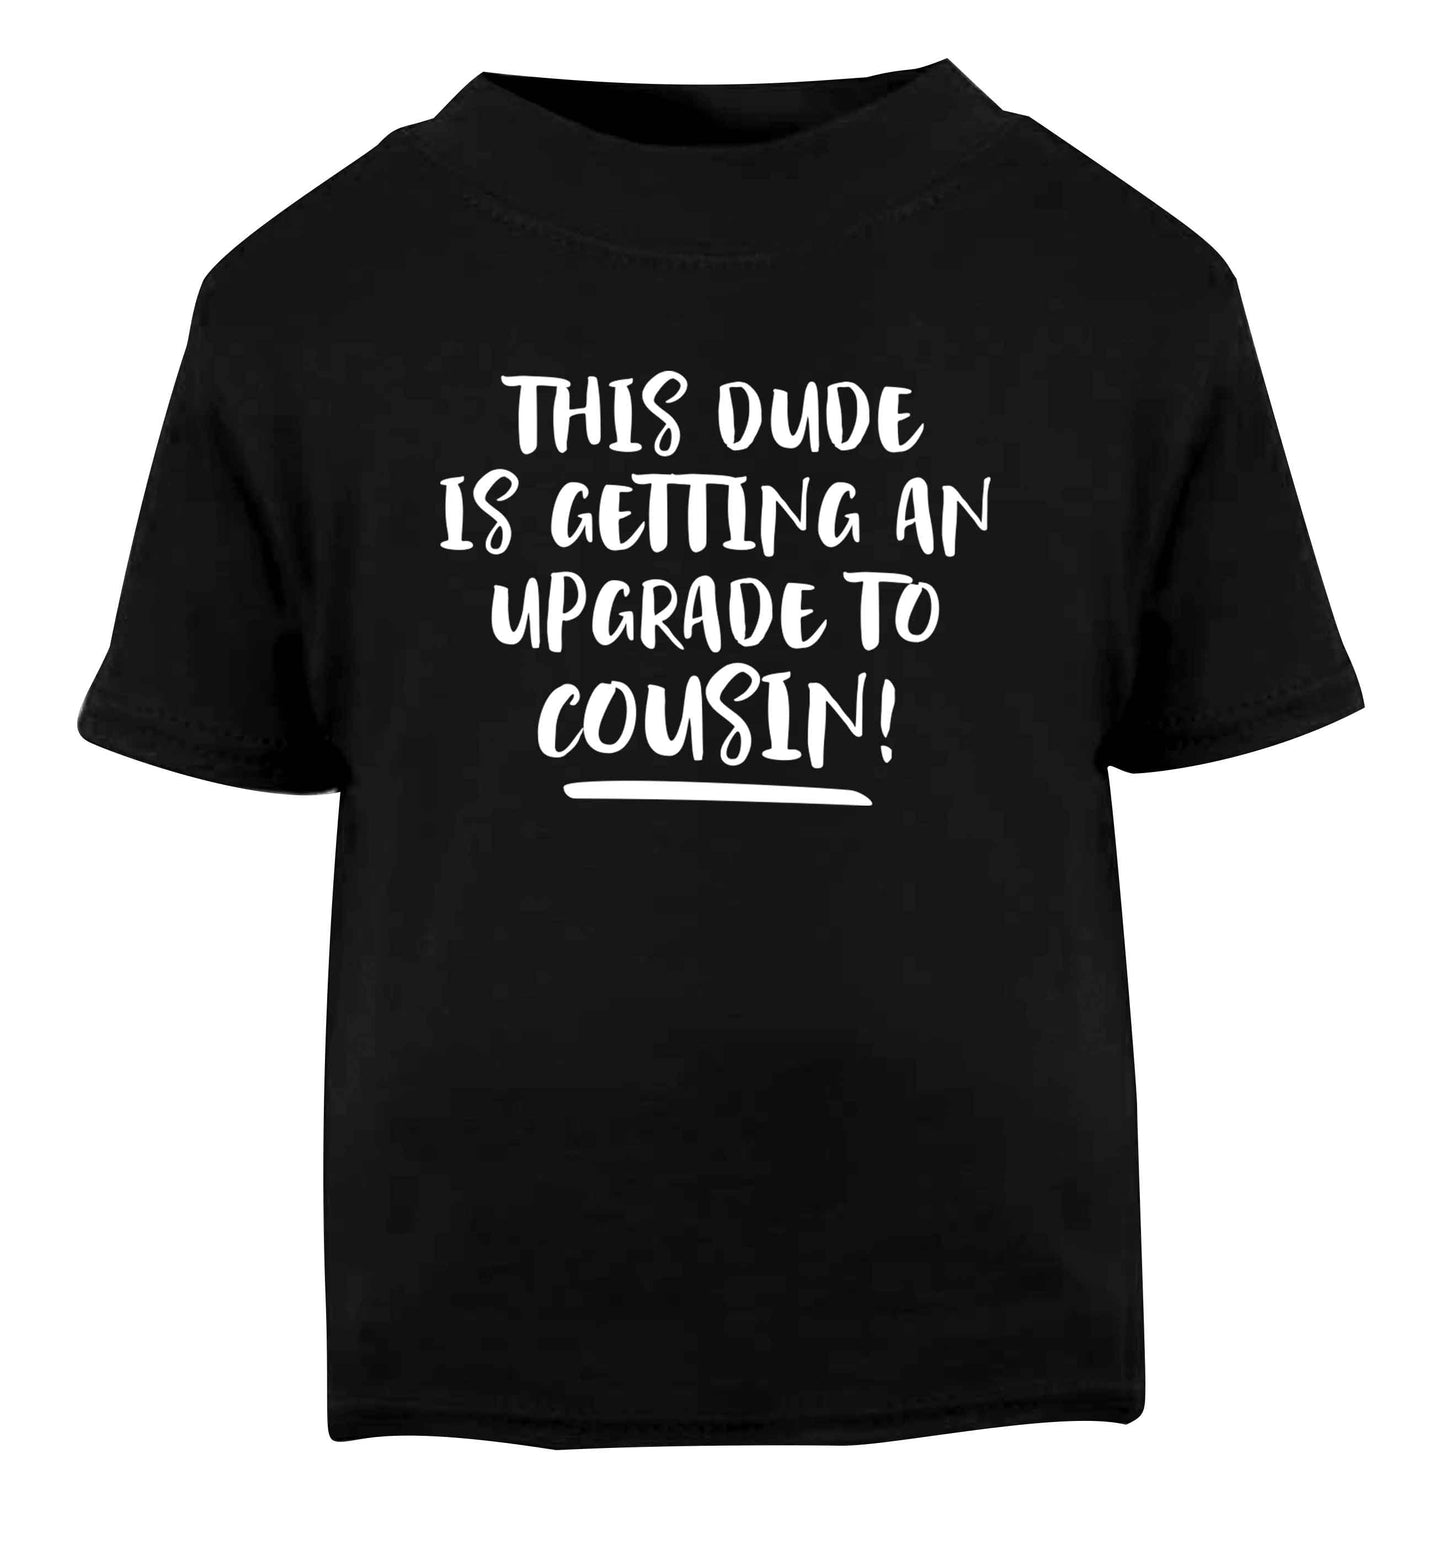 This dude is getting an upgrade to cousin! Black Baby Toddler Tshirt 2 years